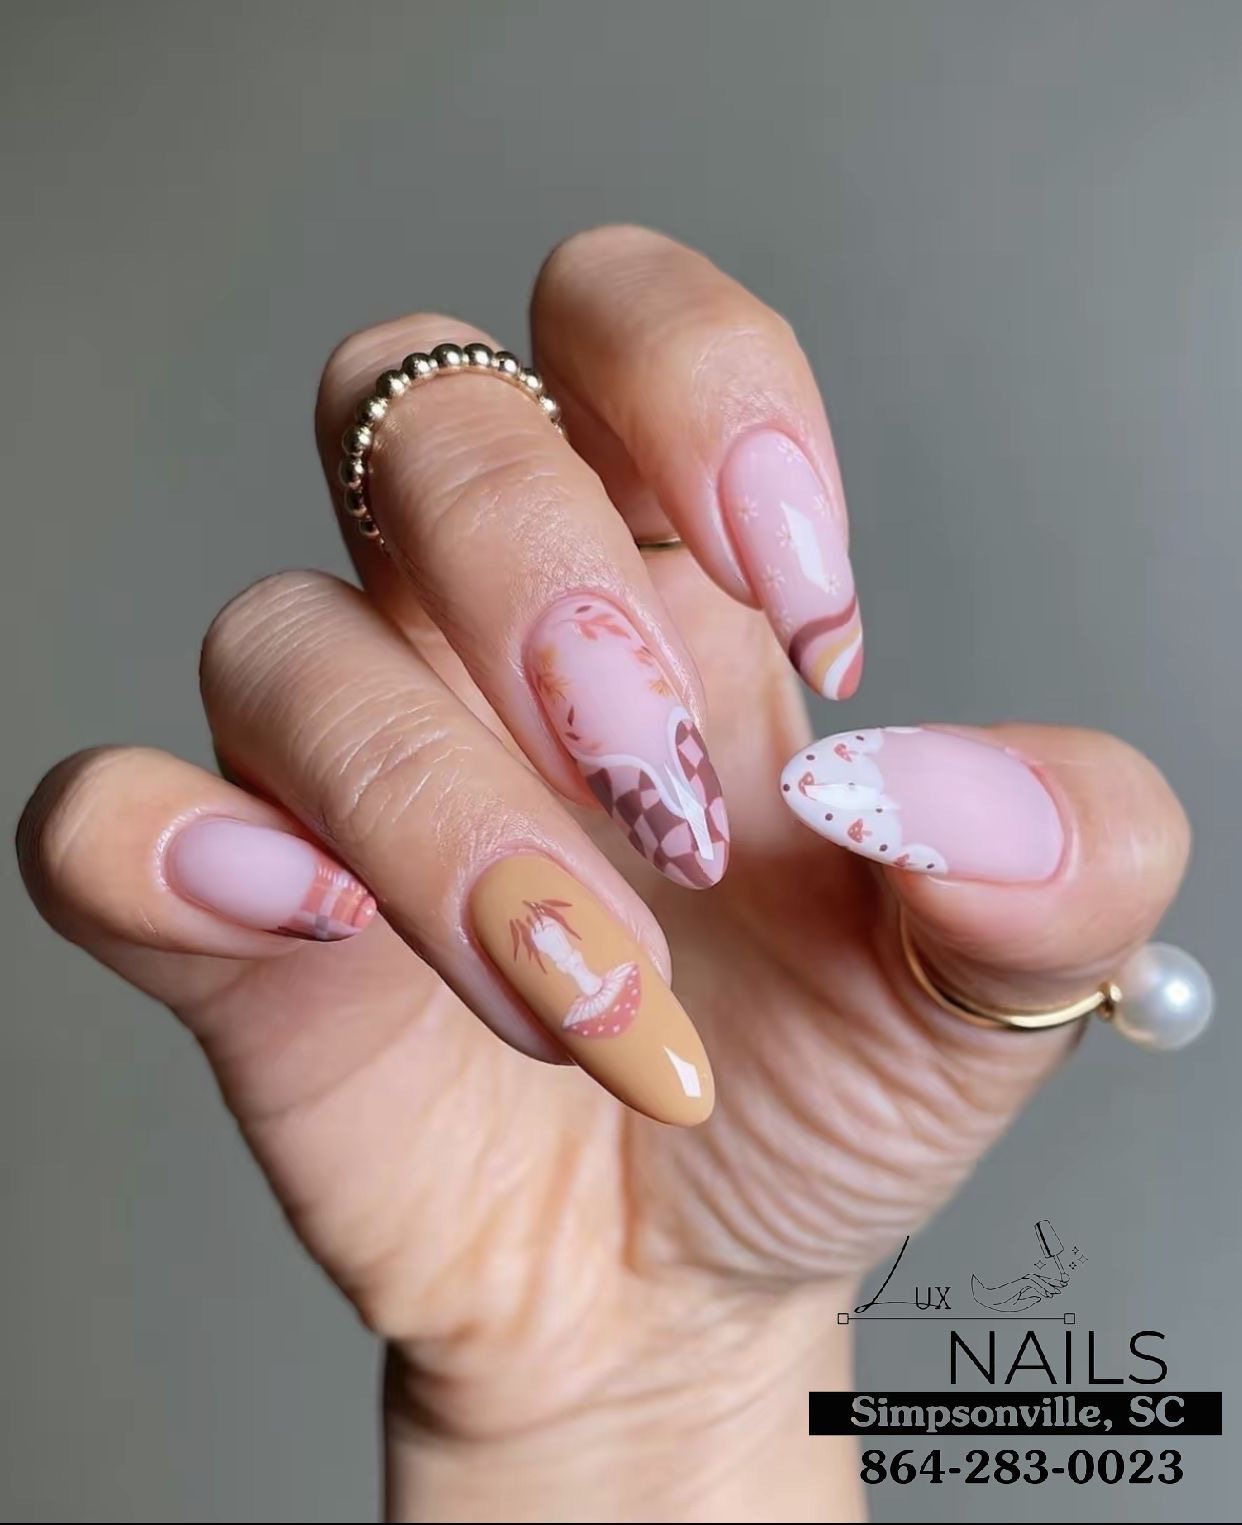 Lux Nails of Five Forks Simpsonville (10% OFF For Birthday)